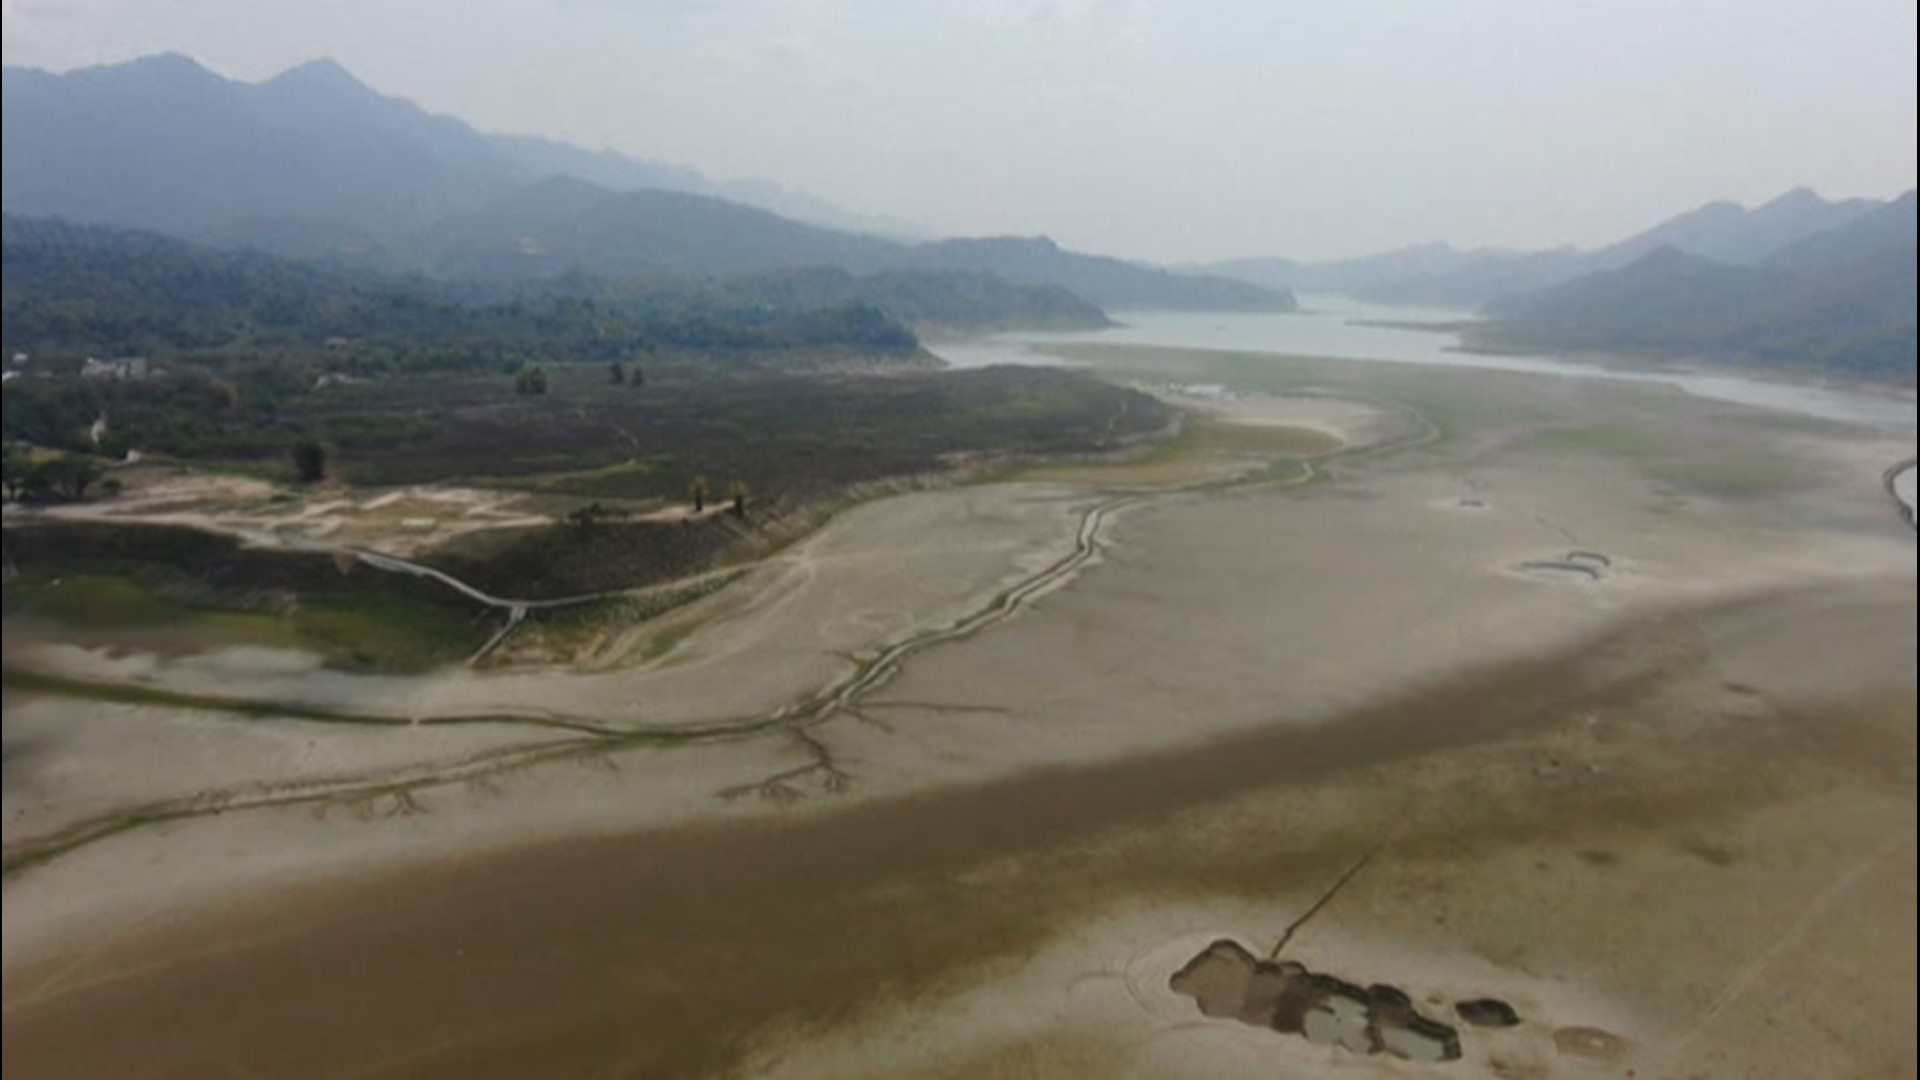 The nation of Taiwan experienced the worst drought in decades. Videos were shared of the Zengwen Dam reservoir running dry with cracks on the ground as a result of the drought on March 17.